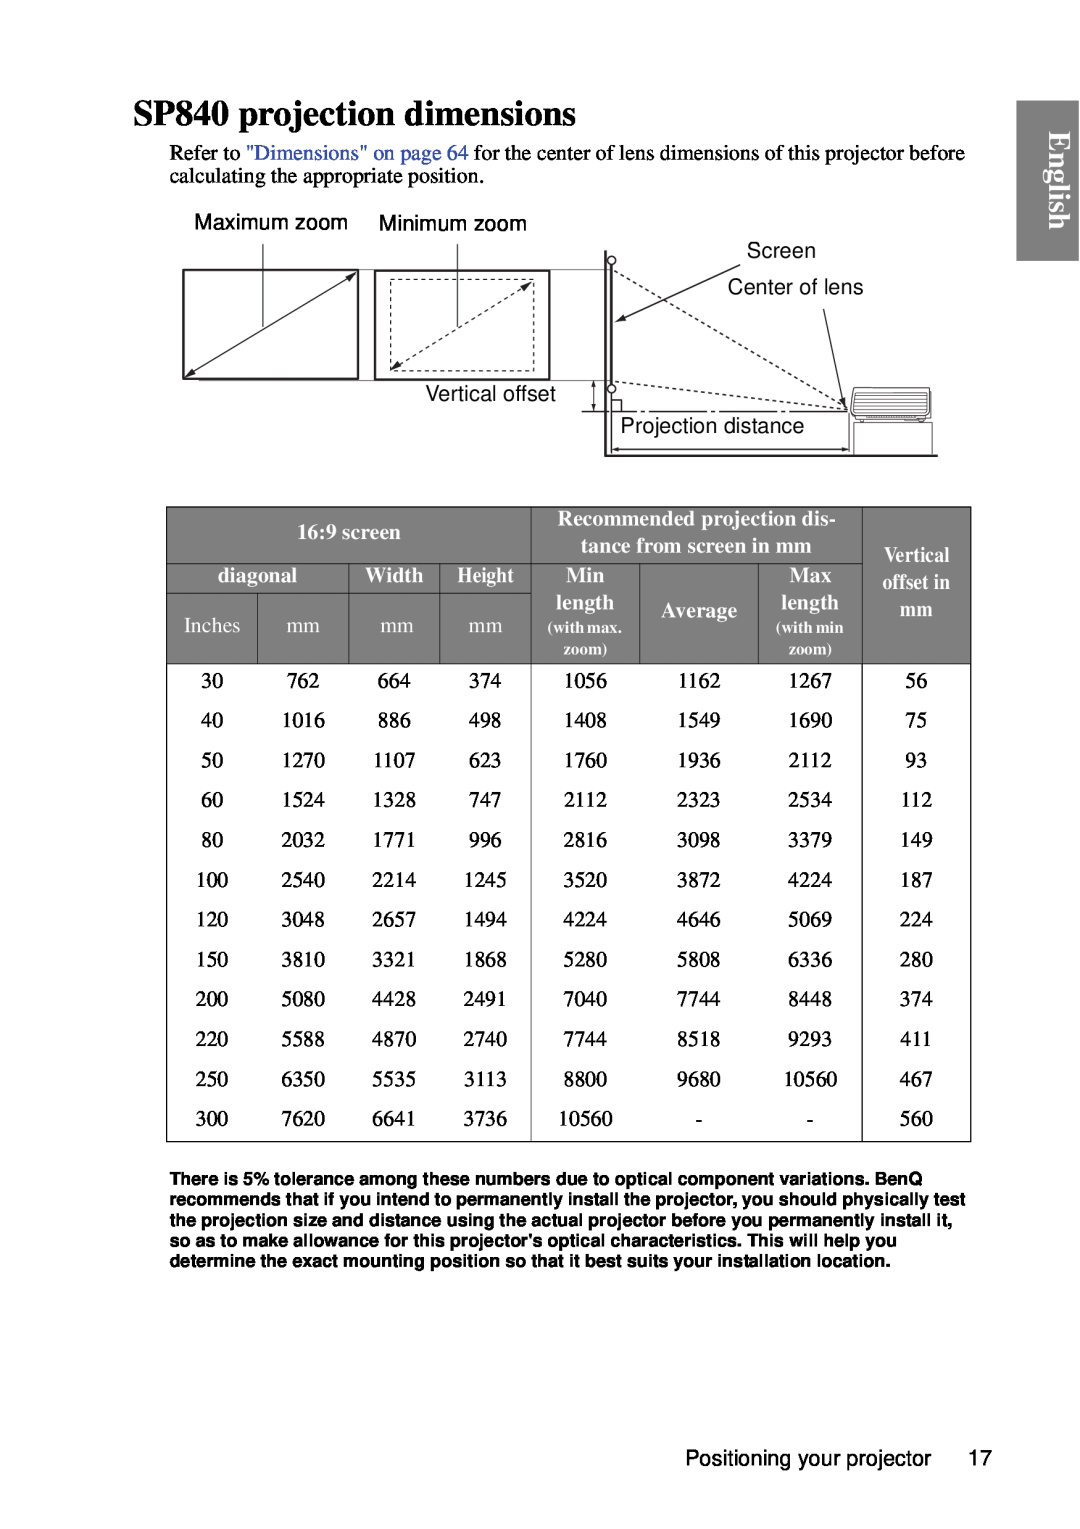 BenQ user manual SP840 projection dimensions, English, screen, diagonal, Inches, length, Average 